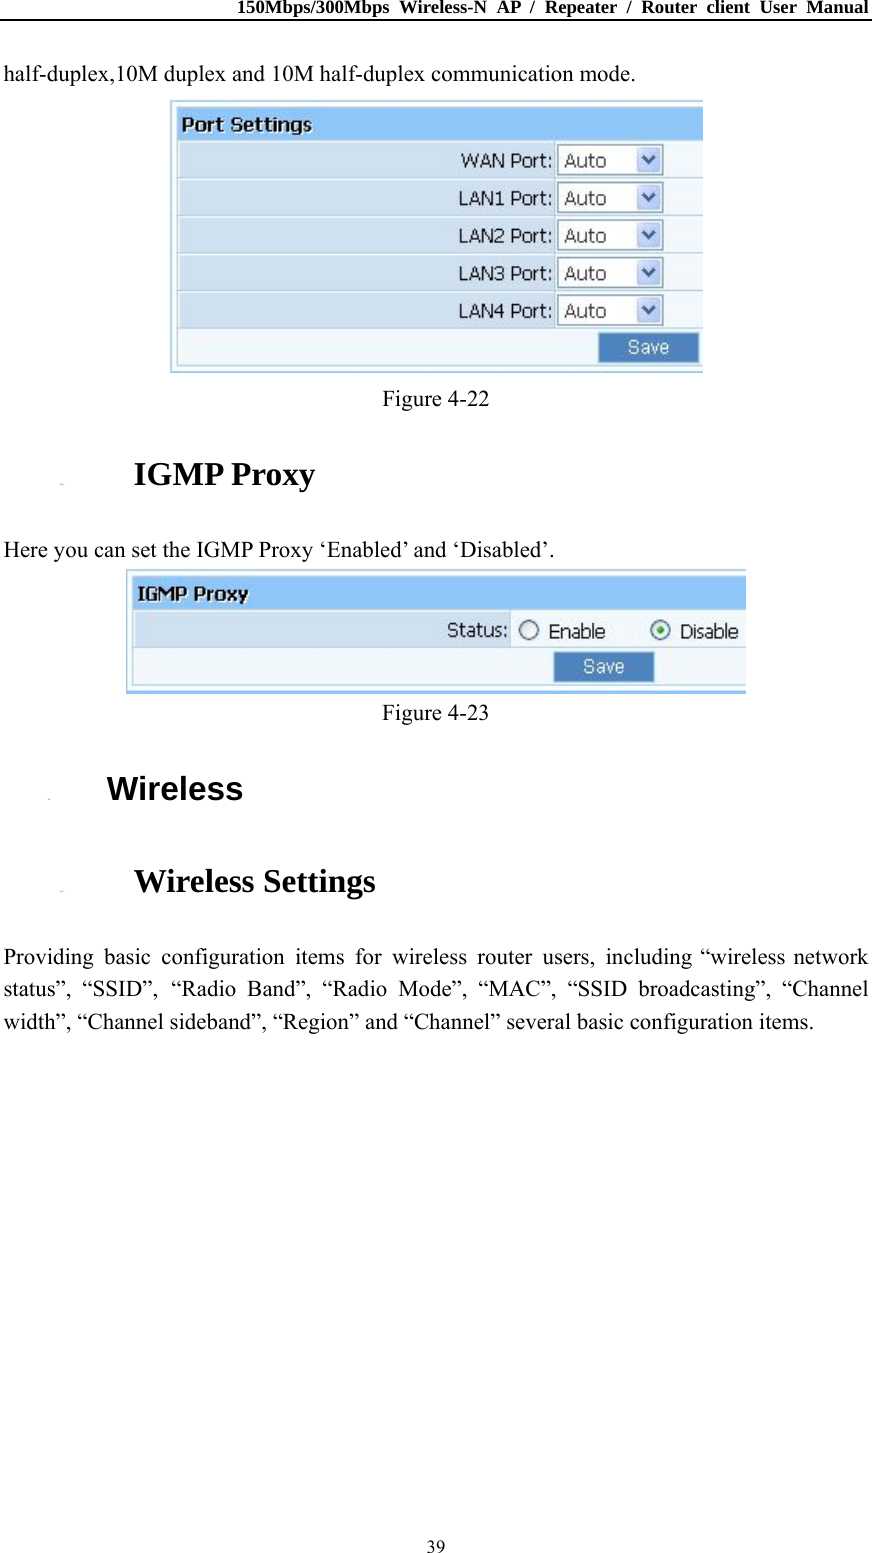 150Mbps/300Mbps Wireless-N AP / Repeater / Router client User Manual  39half-duplex,10M duplex and 10M half-duplex communication mode.  Figure 4-22 4.4.5. IGMP Proxy Here you can set the IGMP Proxy ‘Enabled’ and ‘Disabled’.  Figure 4-23 4.5. Wireless 4.5.1. Wireless Settings Providing basic configuration items for wireless router users, including “wireless network status”, “SSID”, “Radio Band”, “Radio Mode”, “MAC”, “SSID broadcasting”, “Channel width”, “Channel sideband”, “Region” and “Channel” several basic configuration items. 